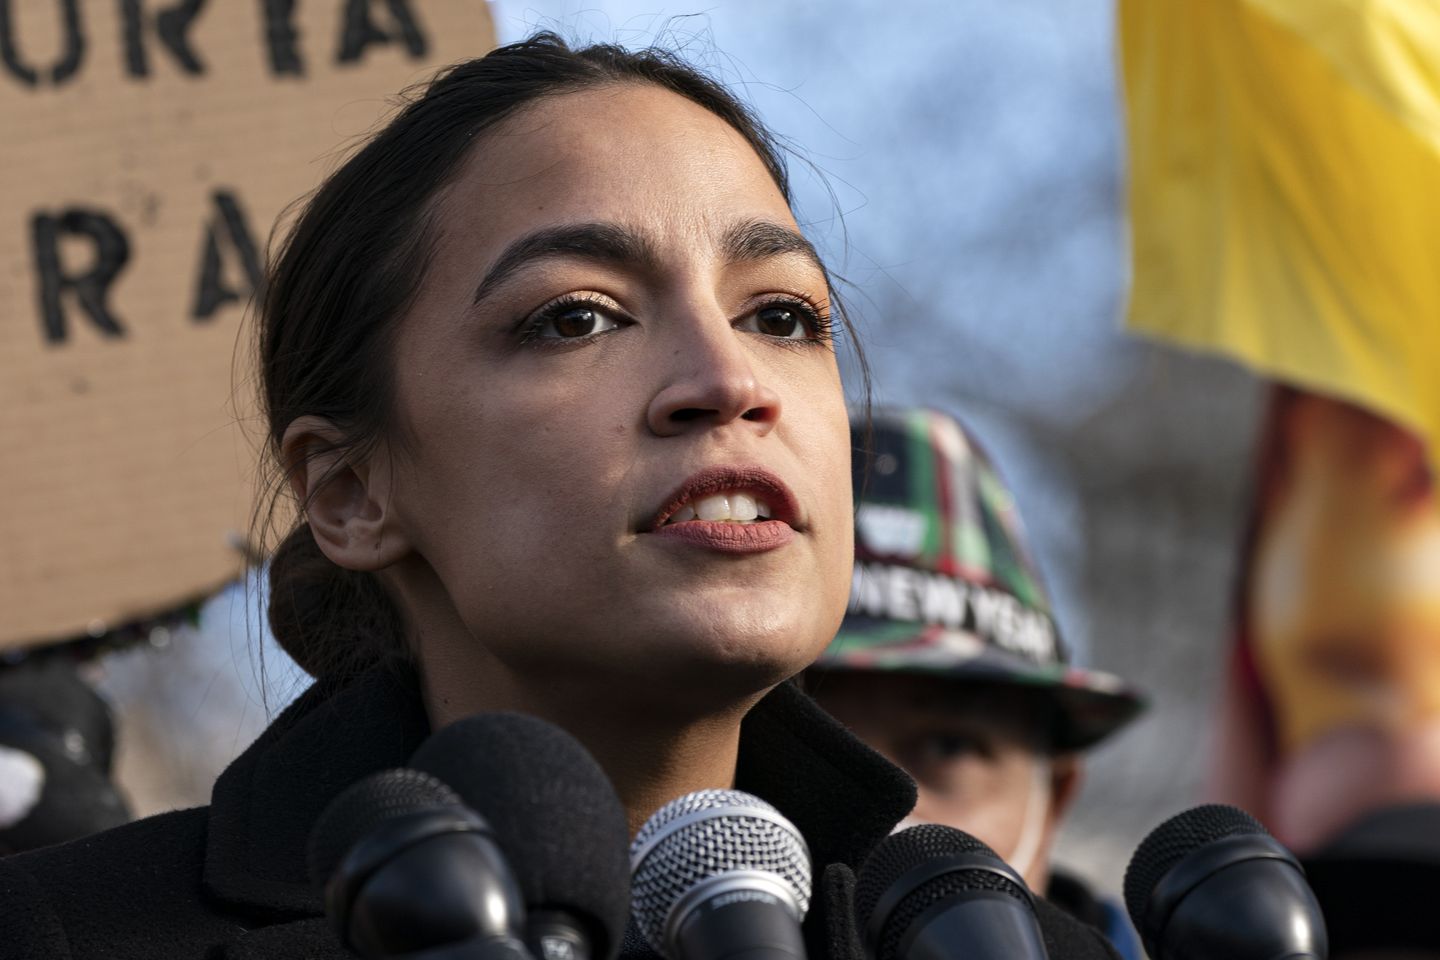 Alexandria Ocasio-Cortez met with anti-war protesters who disrupt local town hall event